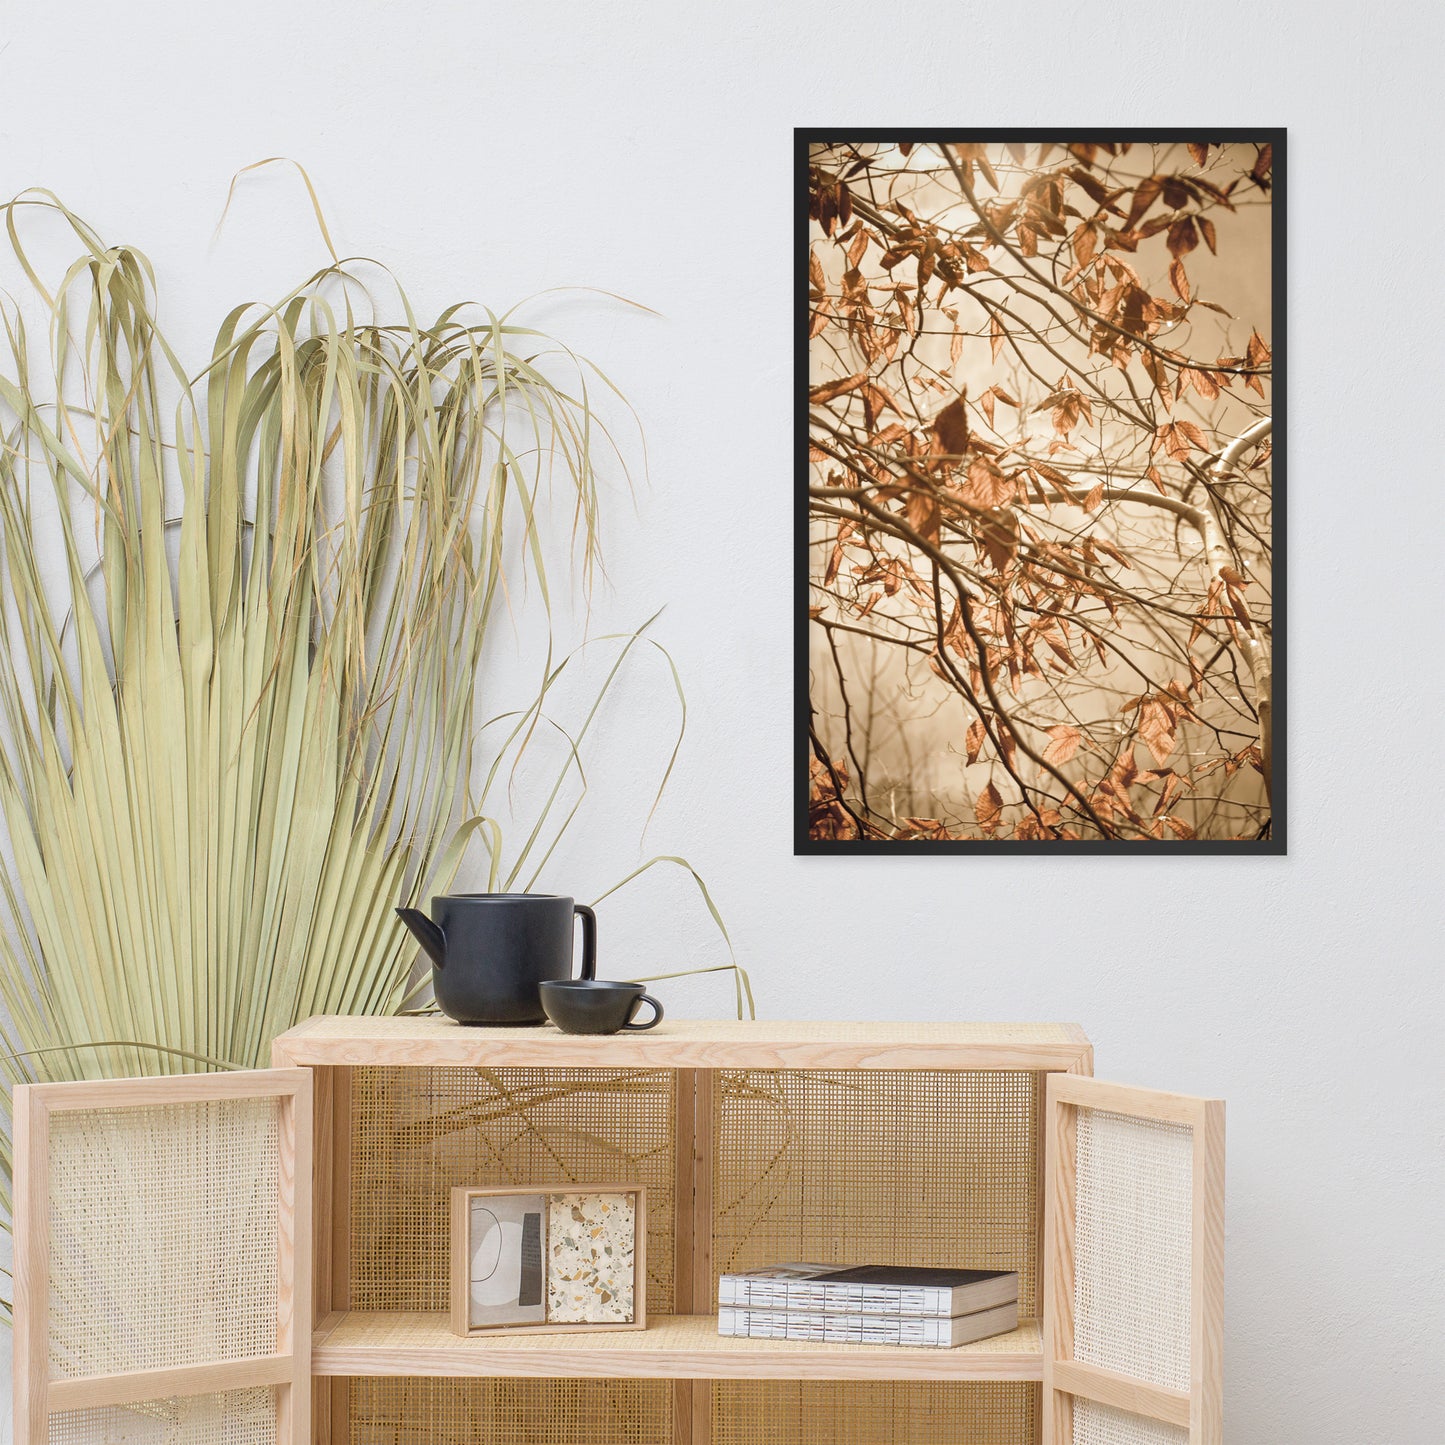 Long Vertical Pictures For Hallway: Aged Winter Leaves Botanical / Nature Photo Framed Wall Art Print - Artwork - Farmhouse Style Wall Decor